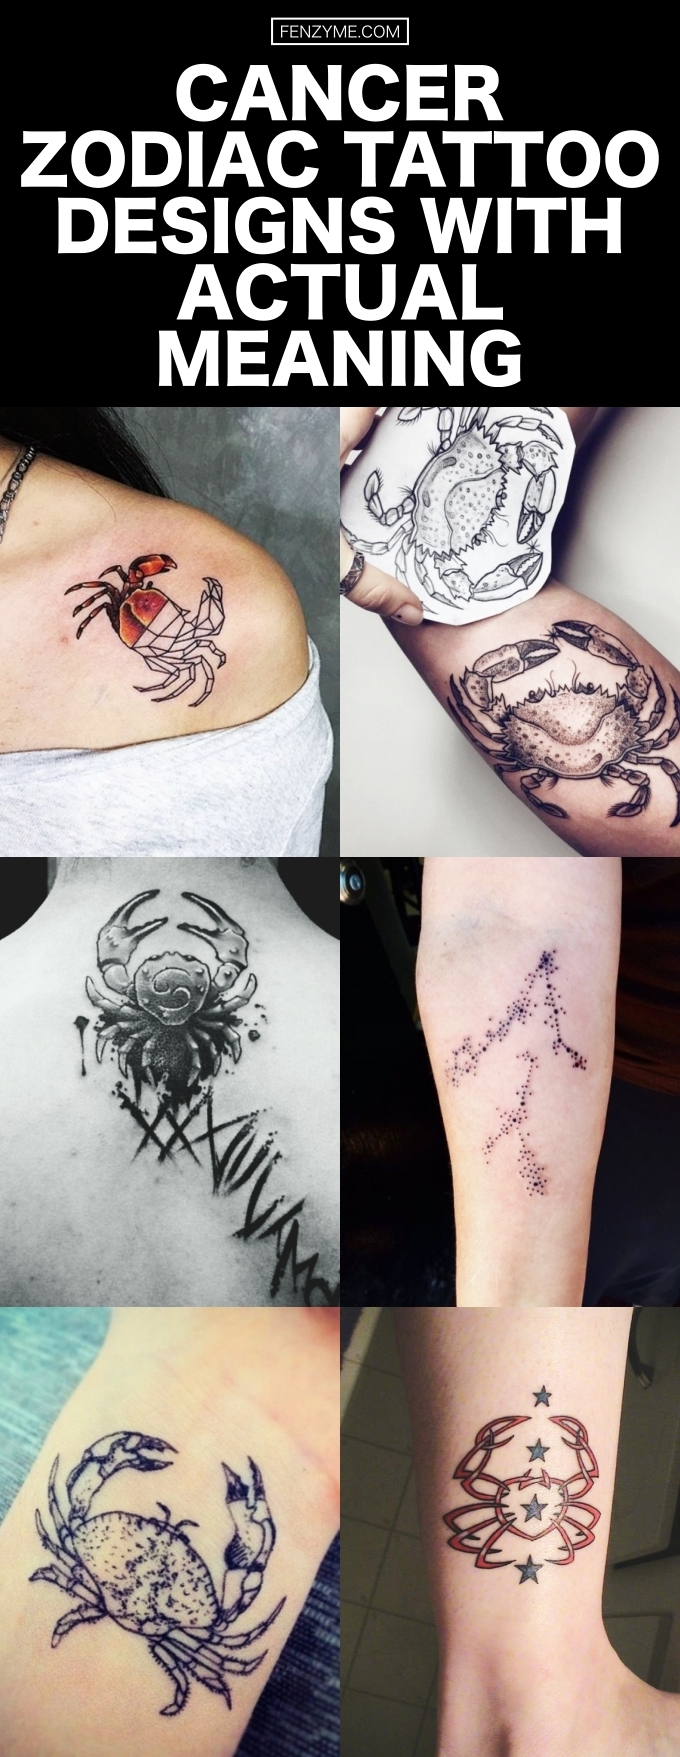 Cancer Zodiac Tattoo Designs With Actual Meaning